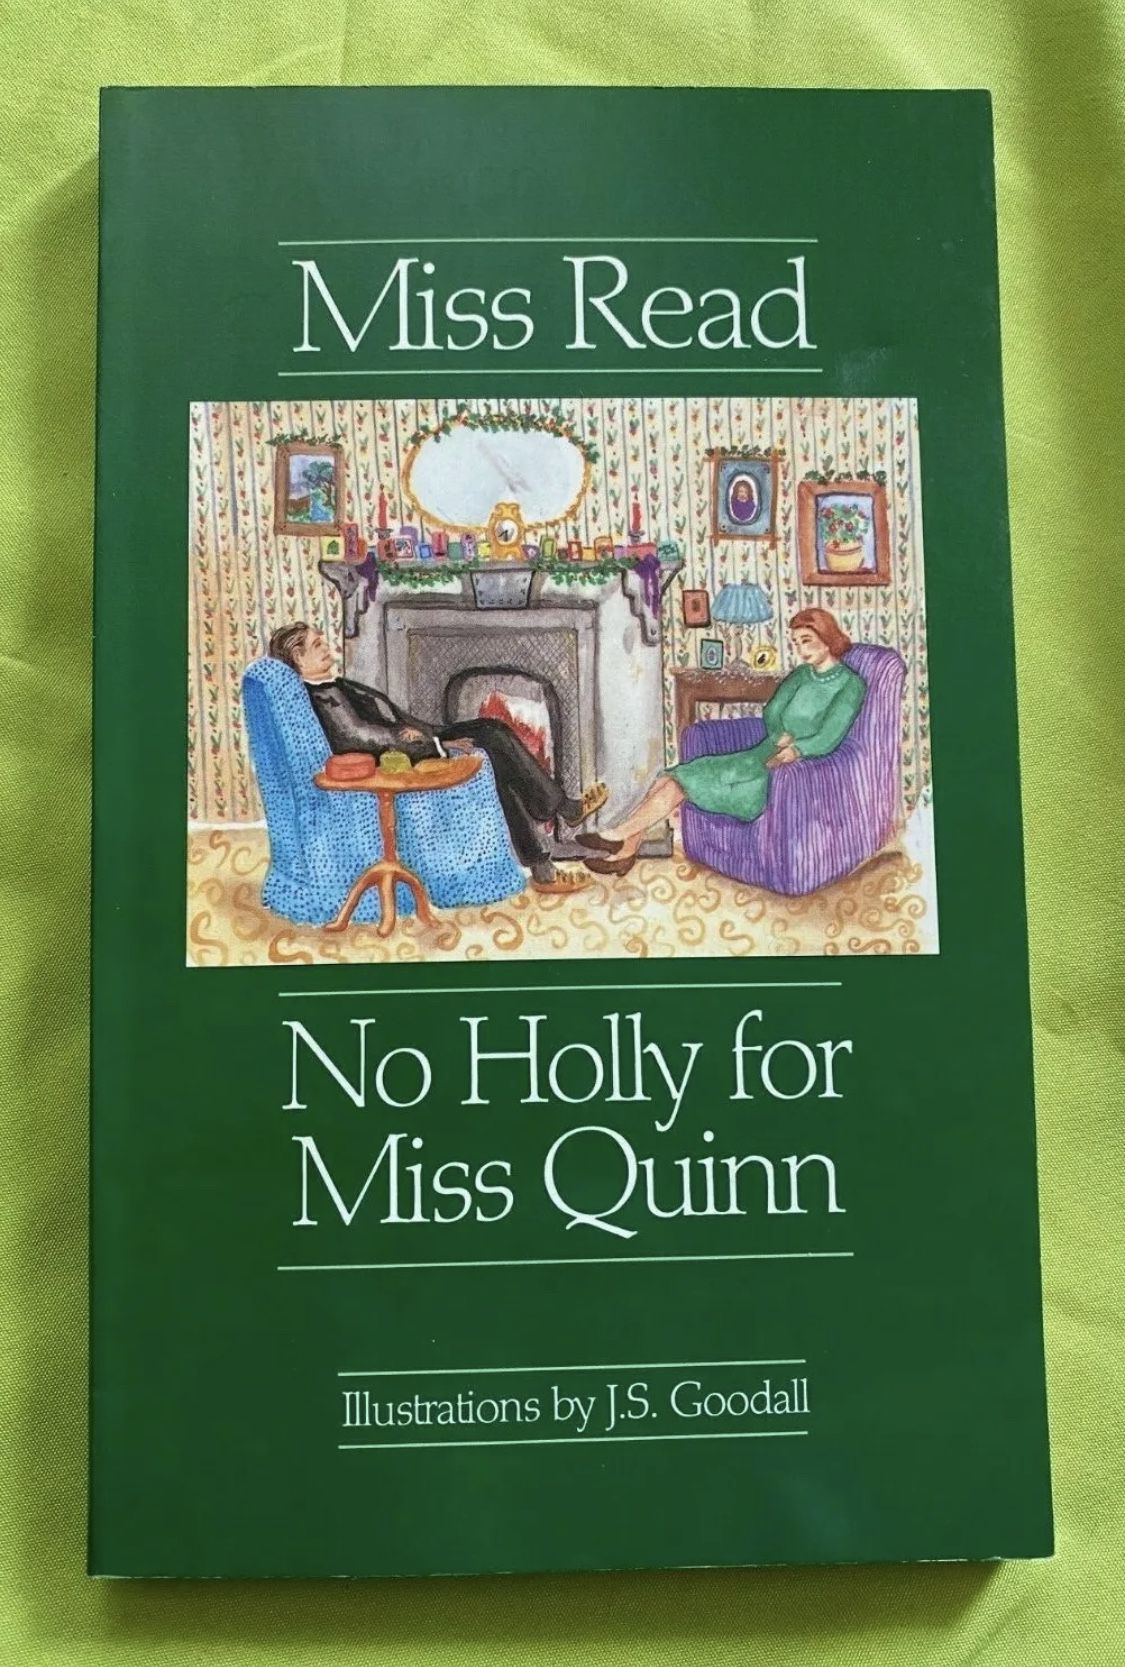 No Holly for Miss Quinn by Miss Read 1992 PB Middle Readers Christmas story VG